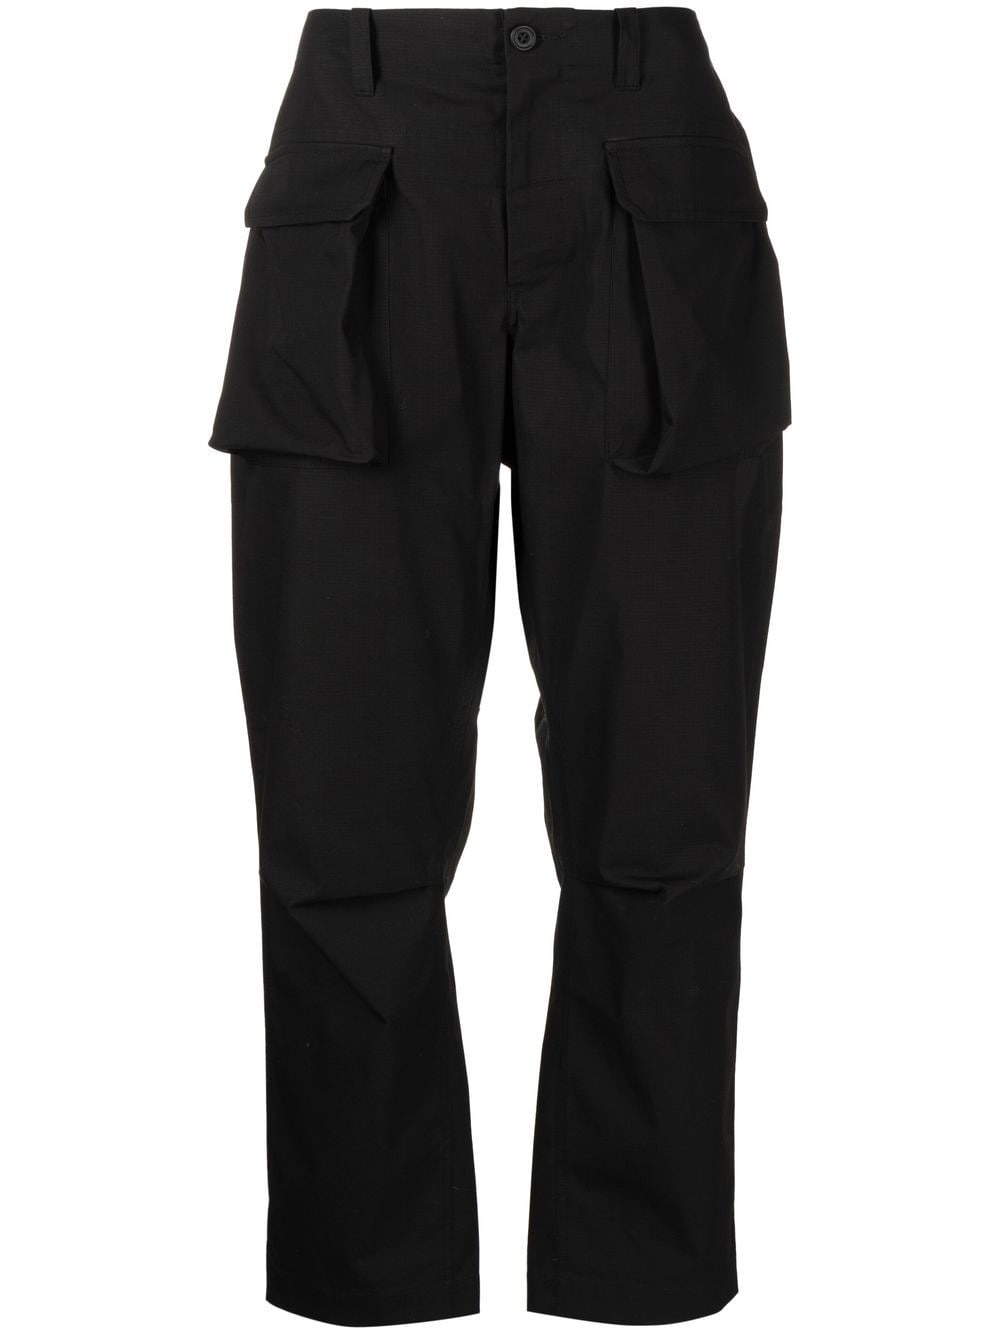 Shop The Power For The People Flap-pocket Straight-leg Trousers